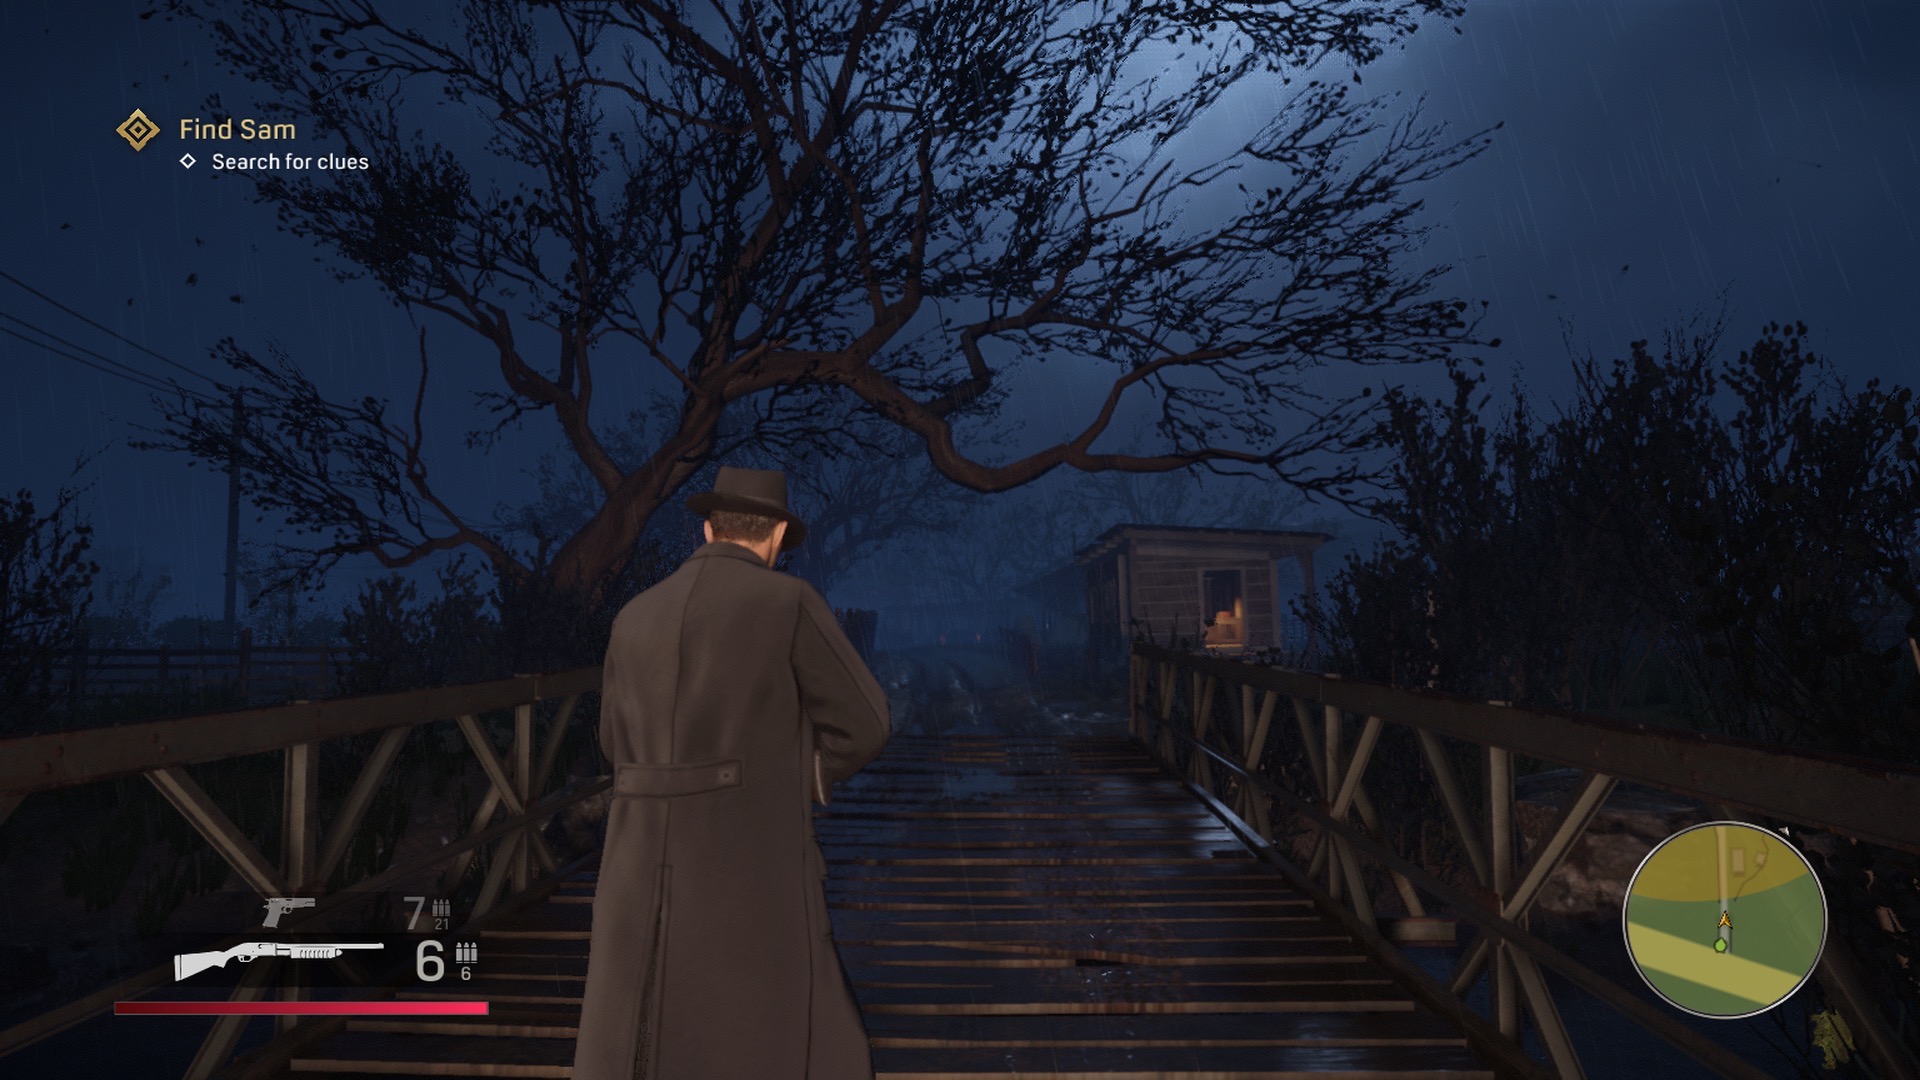 Gameplay screenshot in close third person perspective. Tommy's back is towards the camera as he walks across a bridge at night towards a tree and building on the other side. The shotgun is equipped and the mission is to search for clues